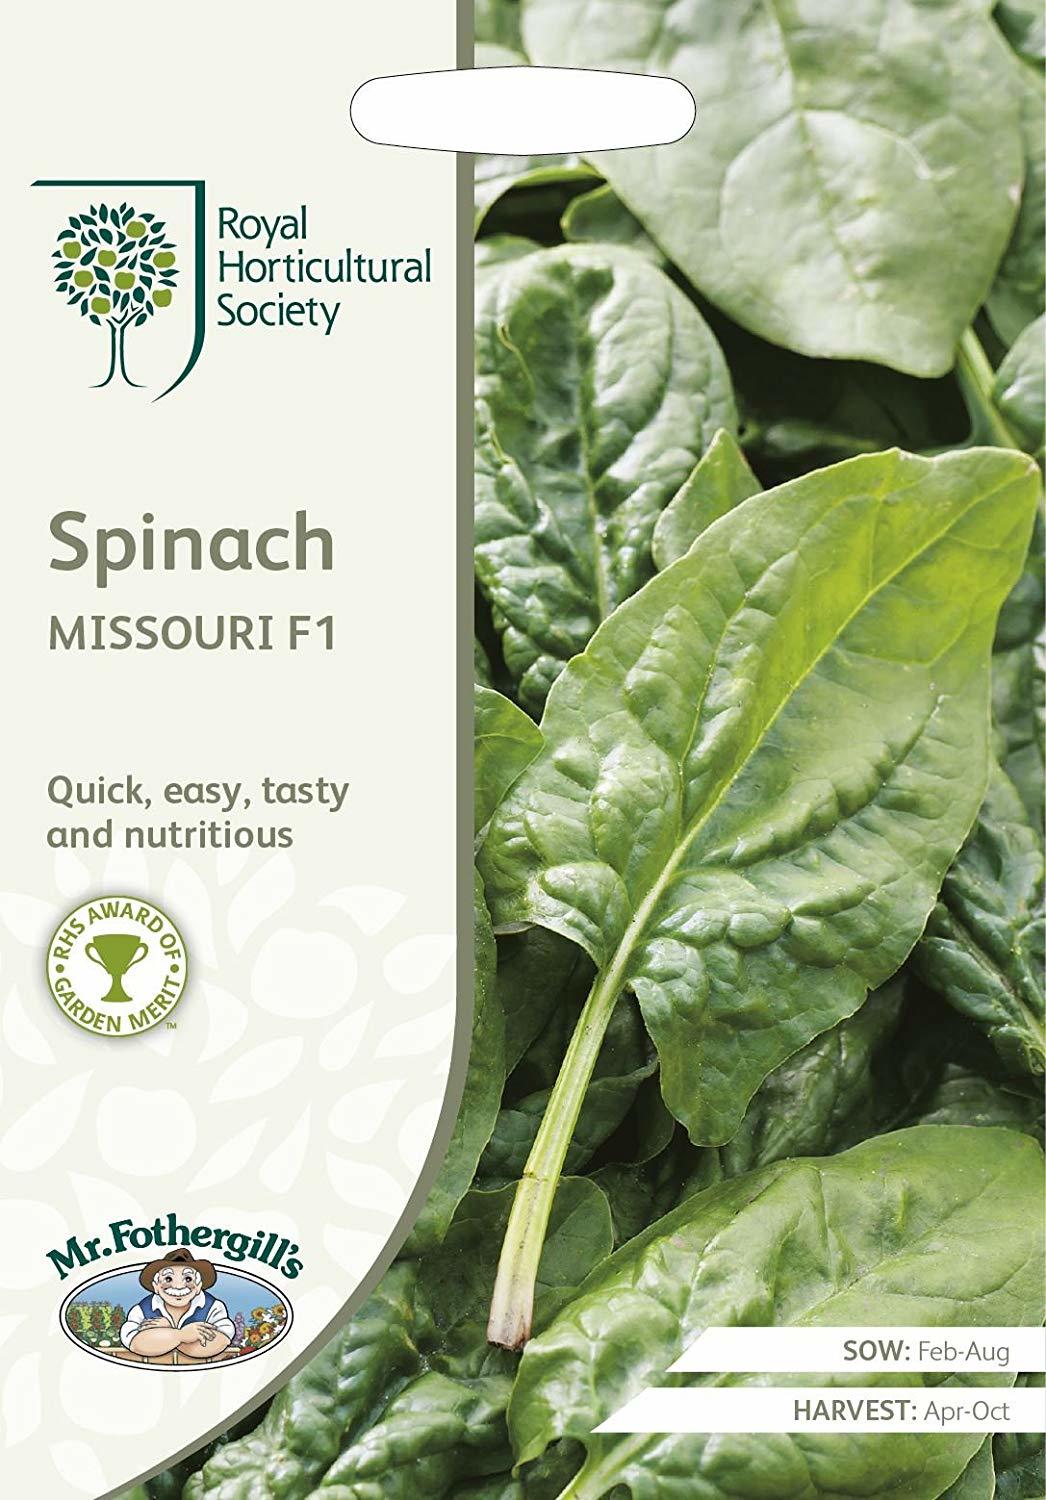 Mr.Fothergill's Seeds Royal Horticultural Society Spinach MISSOURI F1 RHS スピナッチ ミズーリ F1 ミスター・フォザーギルズシード